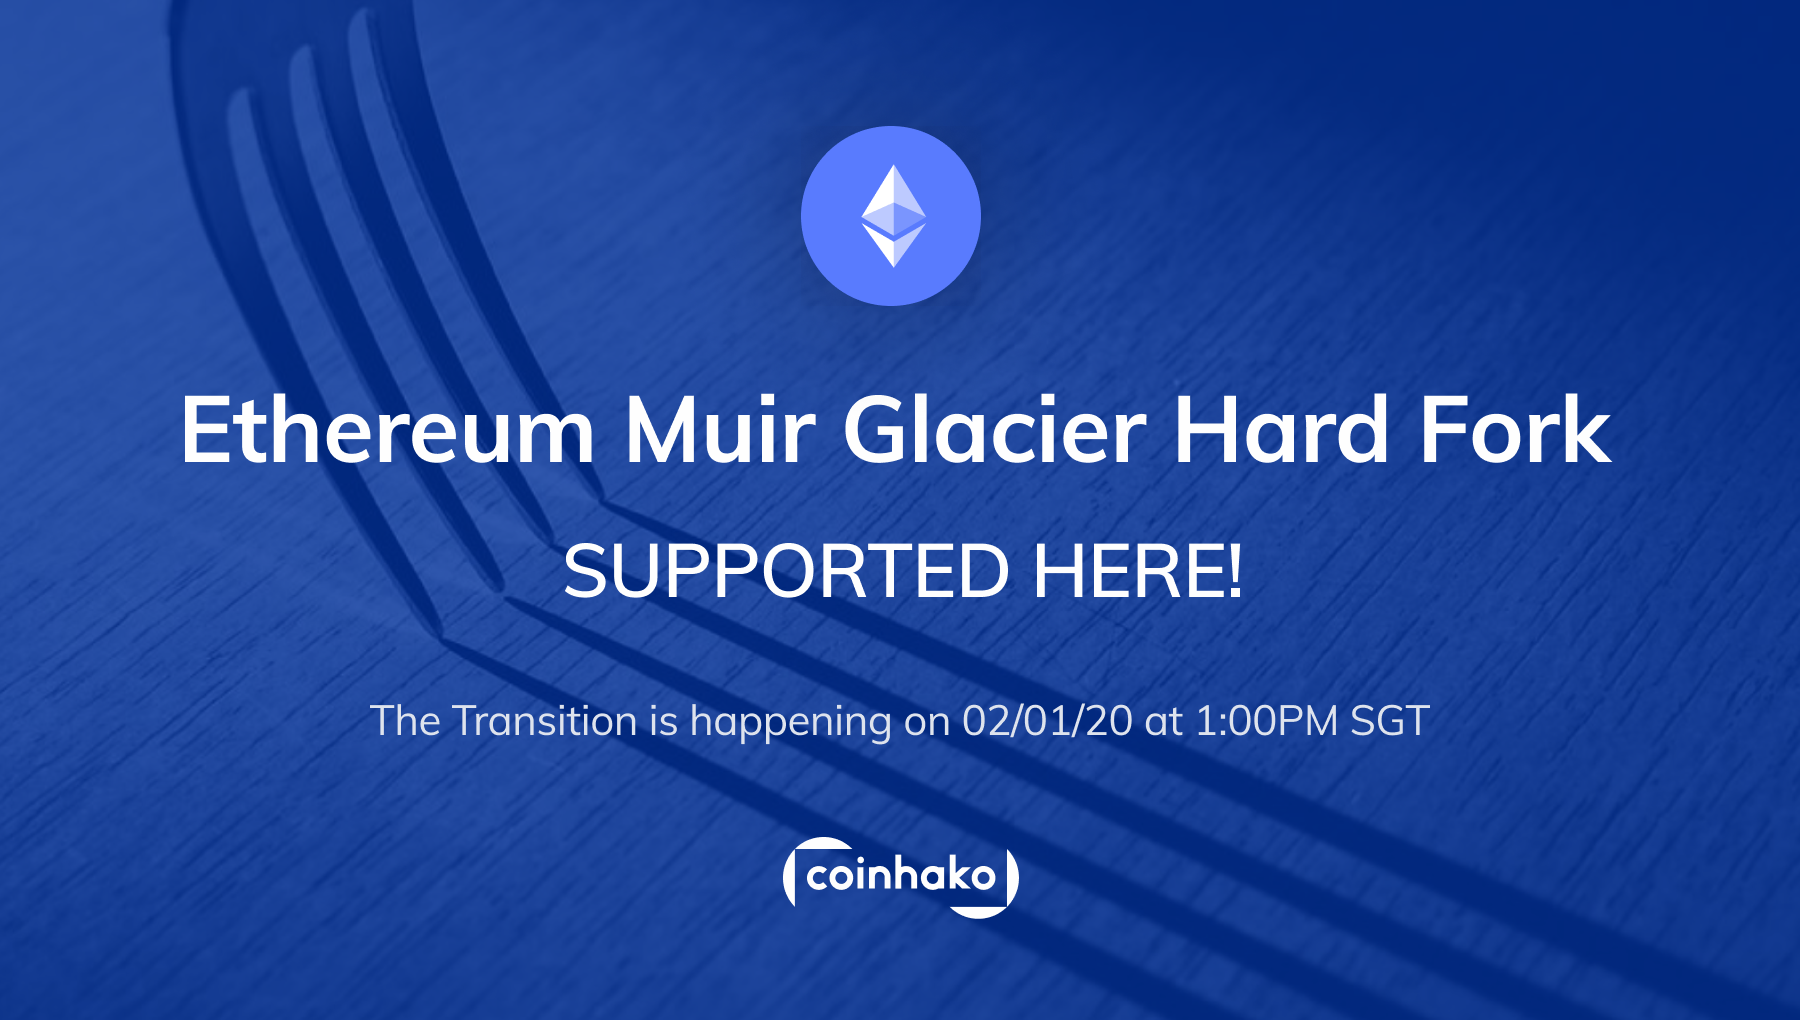 Coinhako Is Supporting The Ethereum Muir Glacier Fork Upgrade